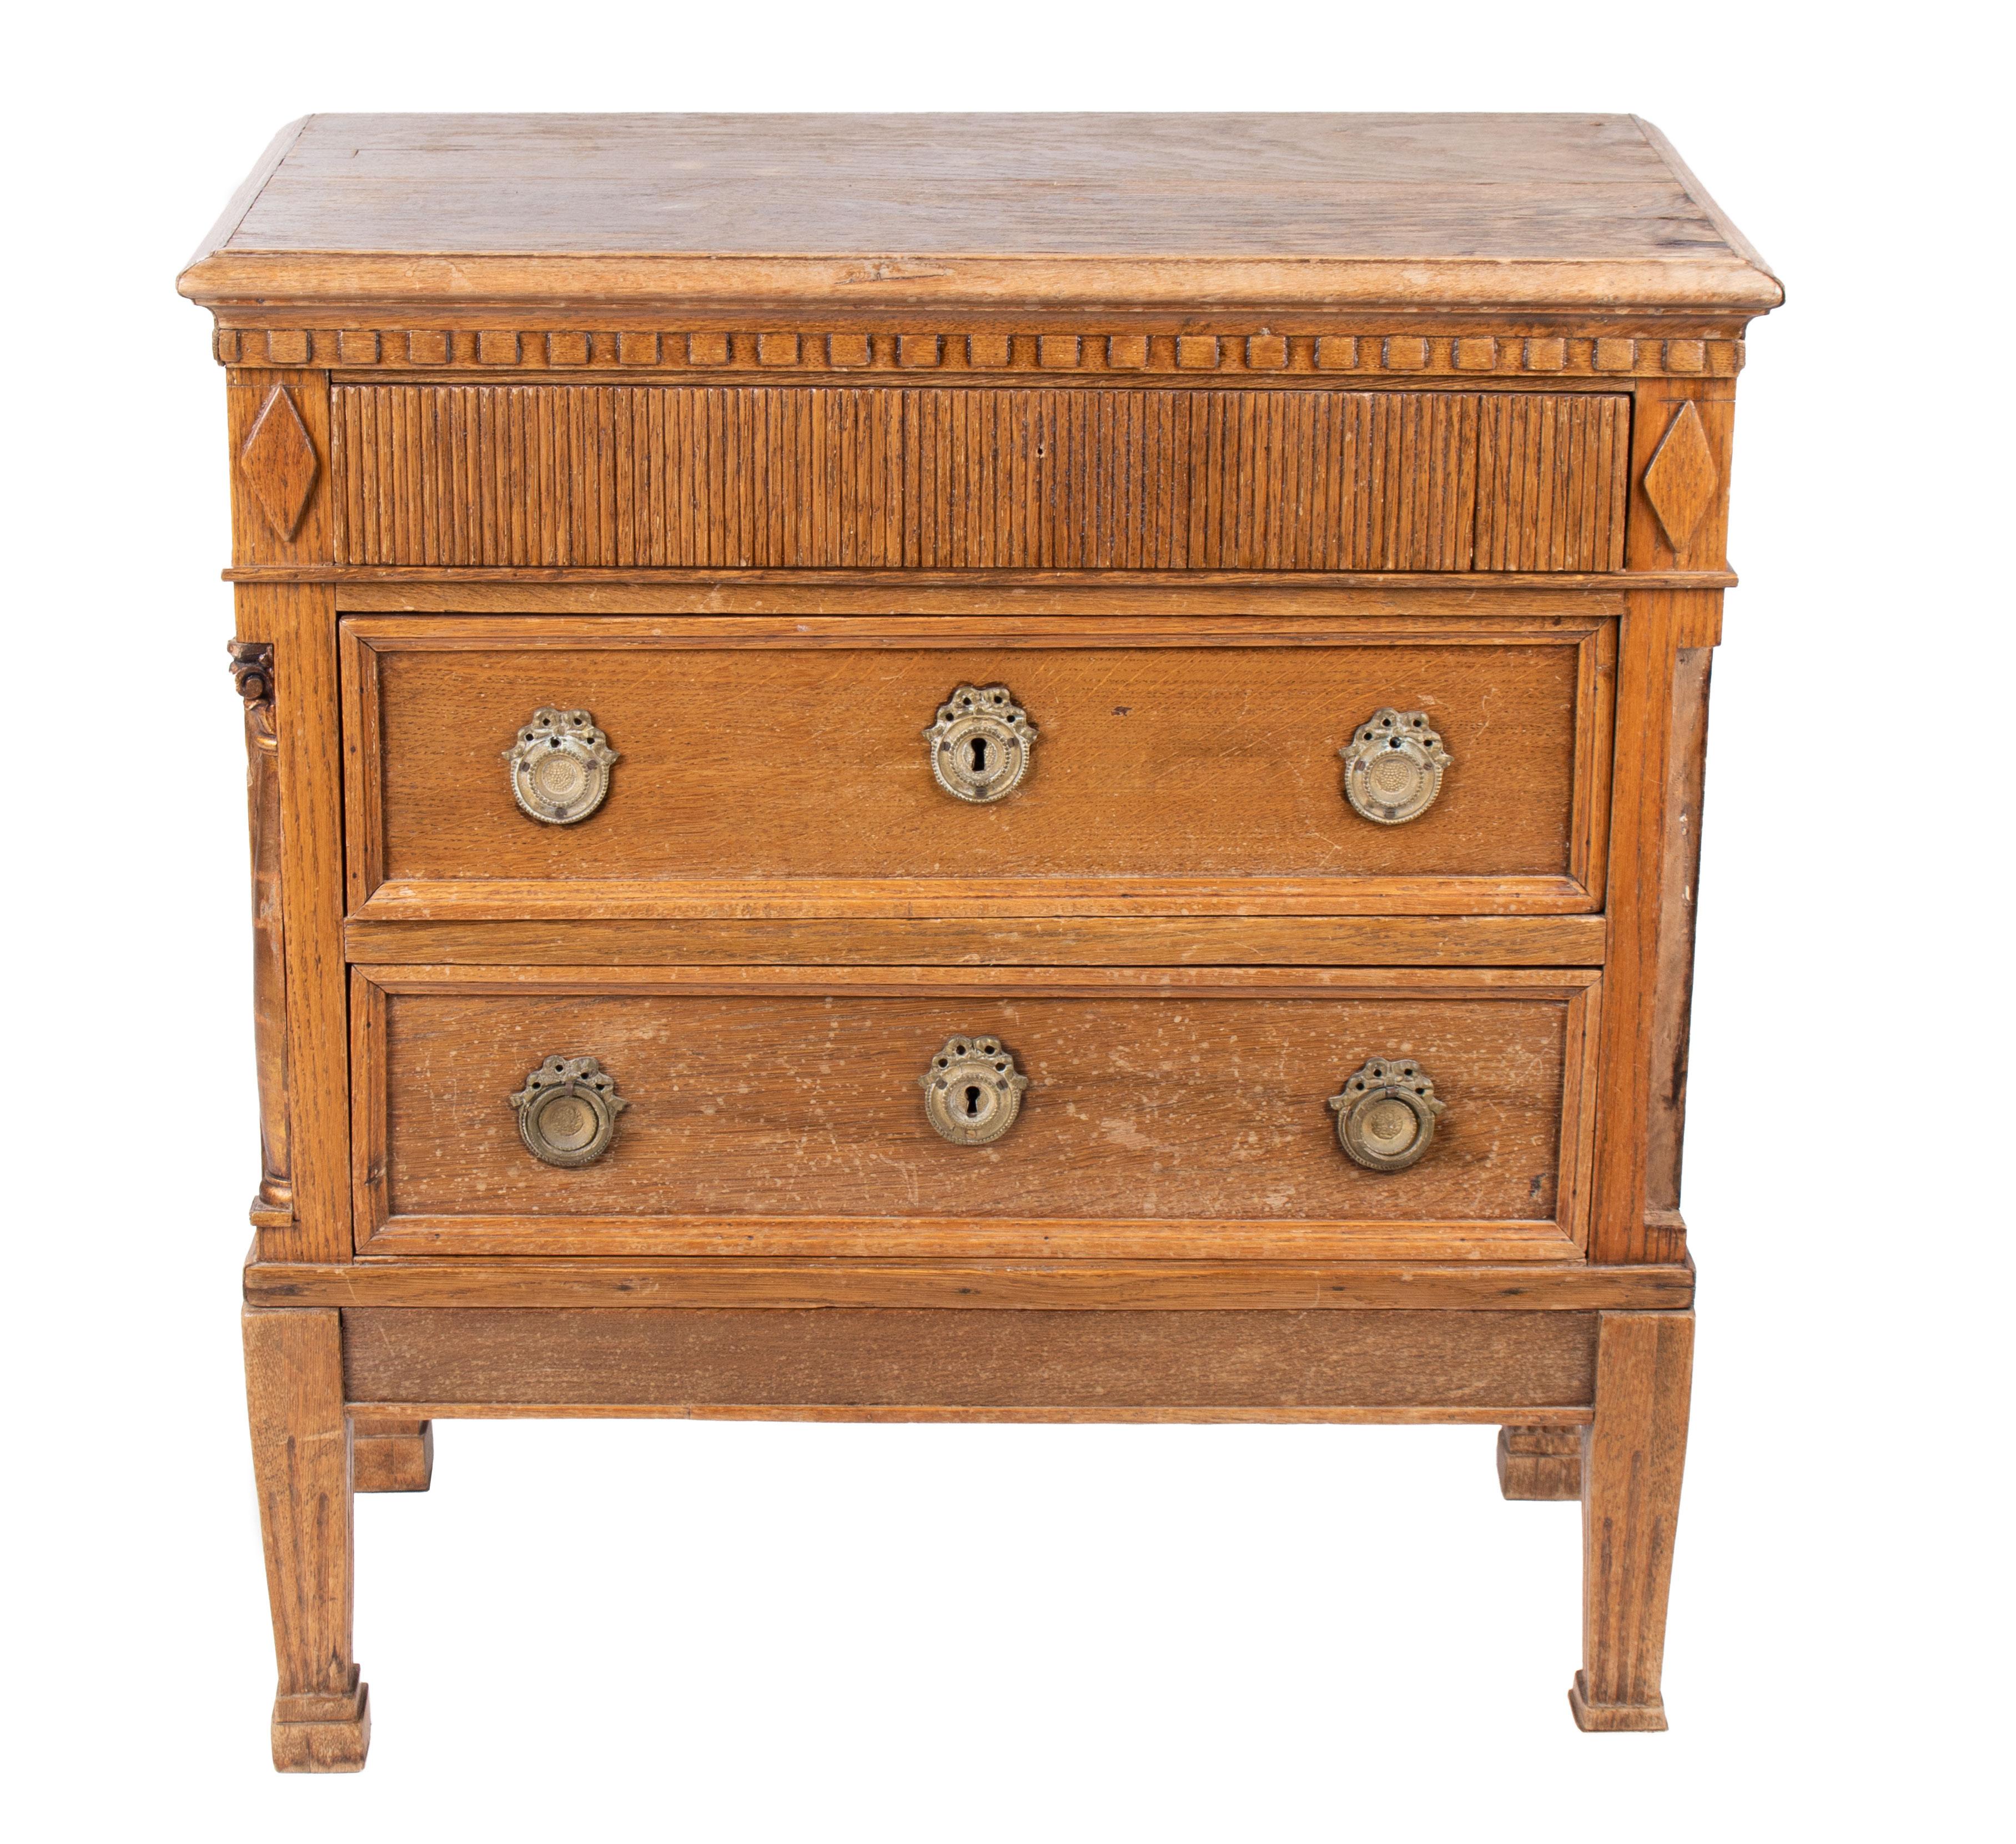 19th century French two-drawer chest.